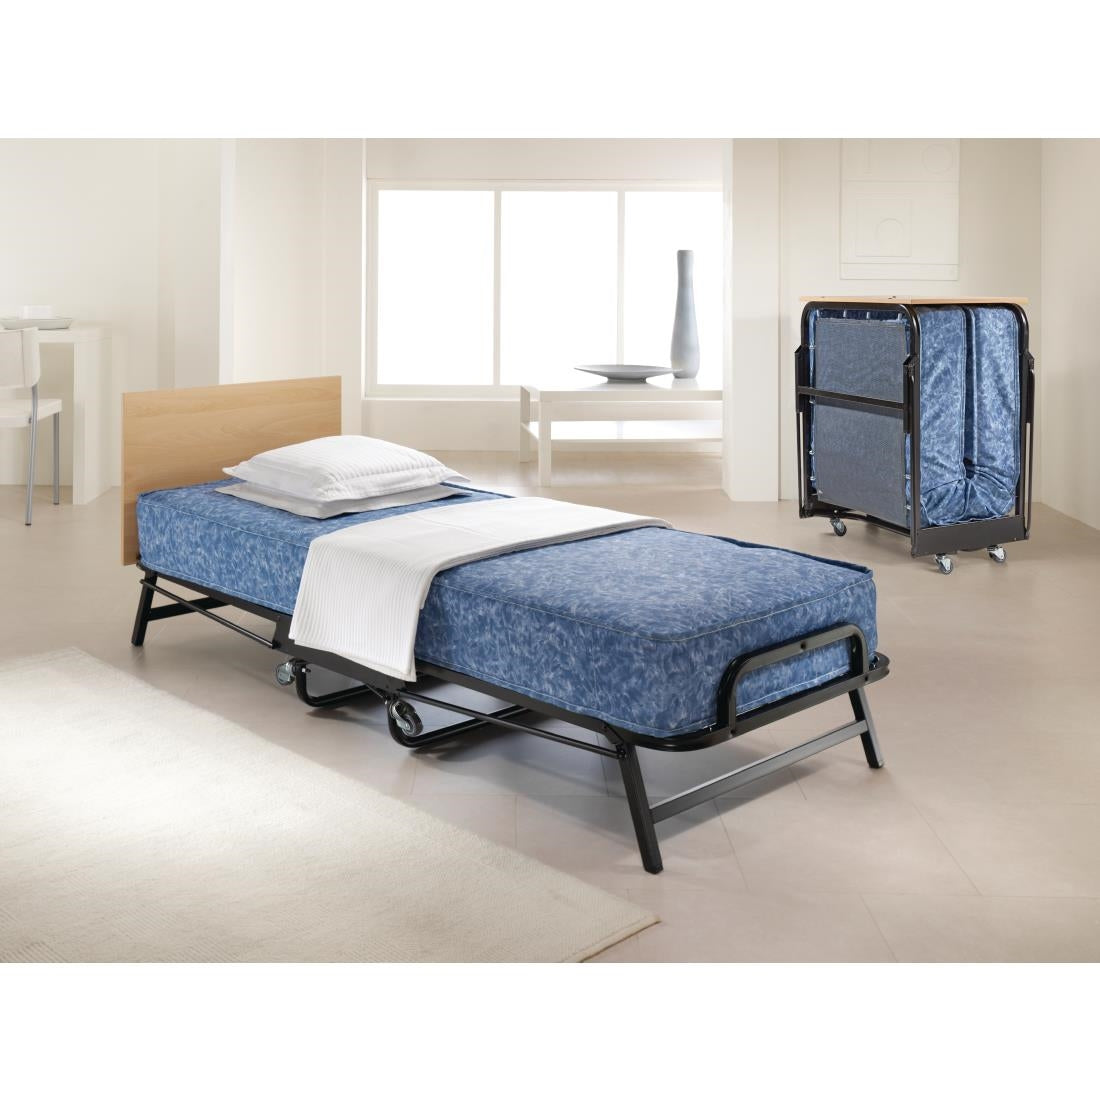 Jay-Be Contract Folding Bed with Water Resistant Mattress Single in Black Colour JD Catering Equipment Solutions Ltd